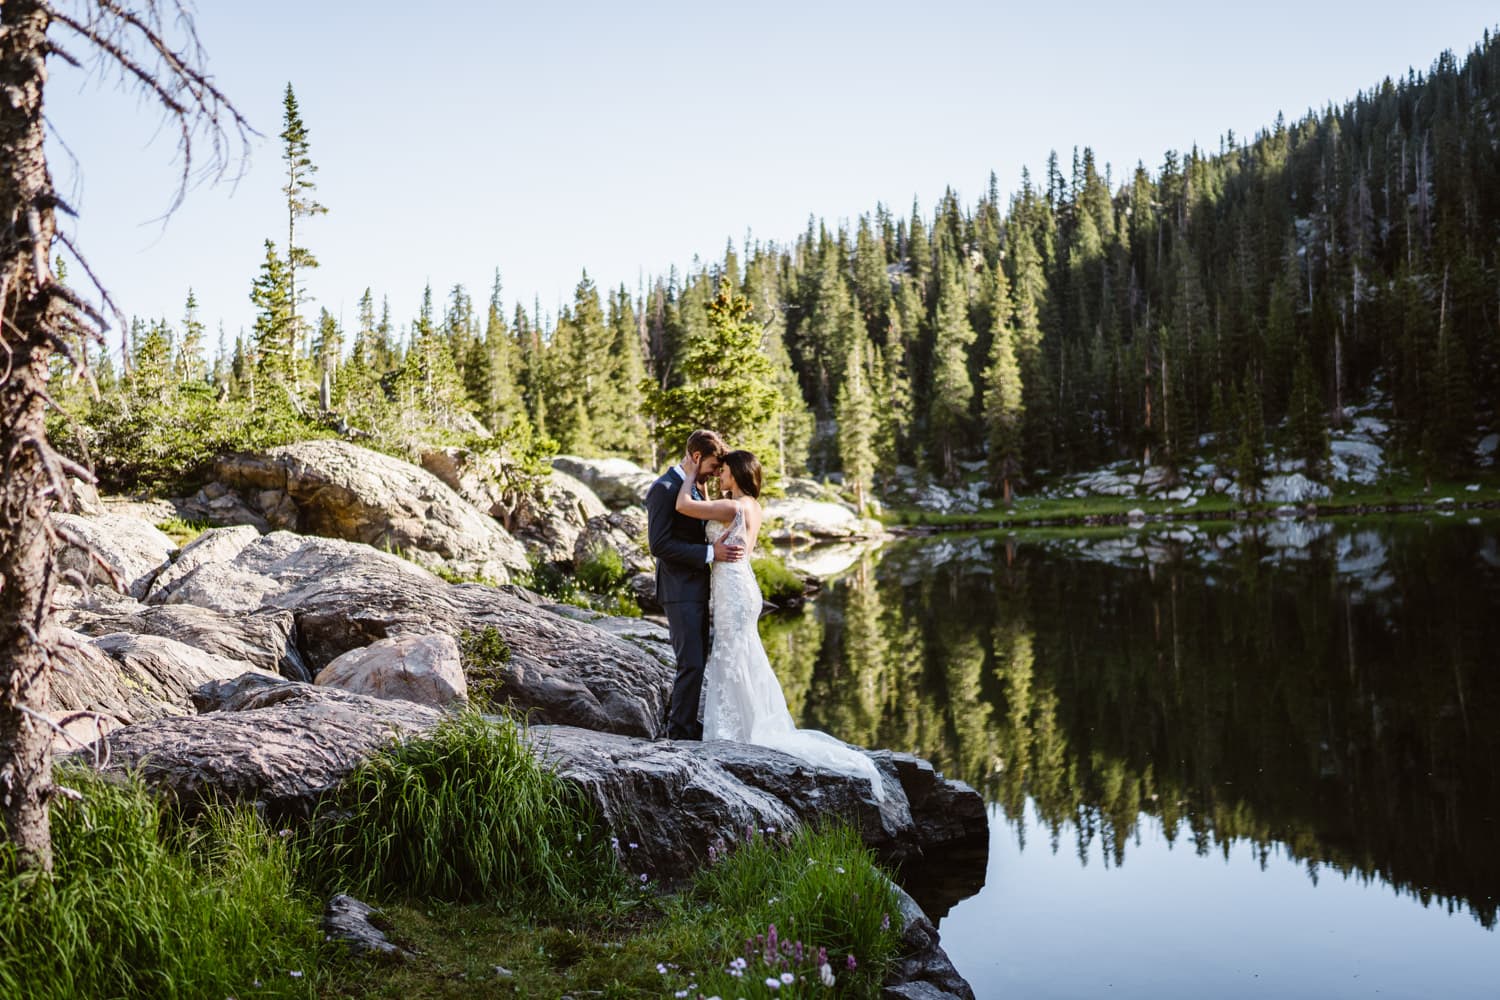 A couple shares an intimate moment with alpine lake reflections.